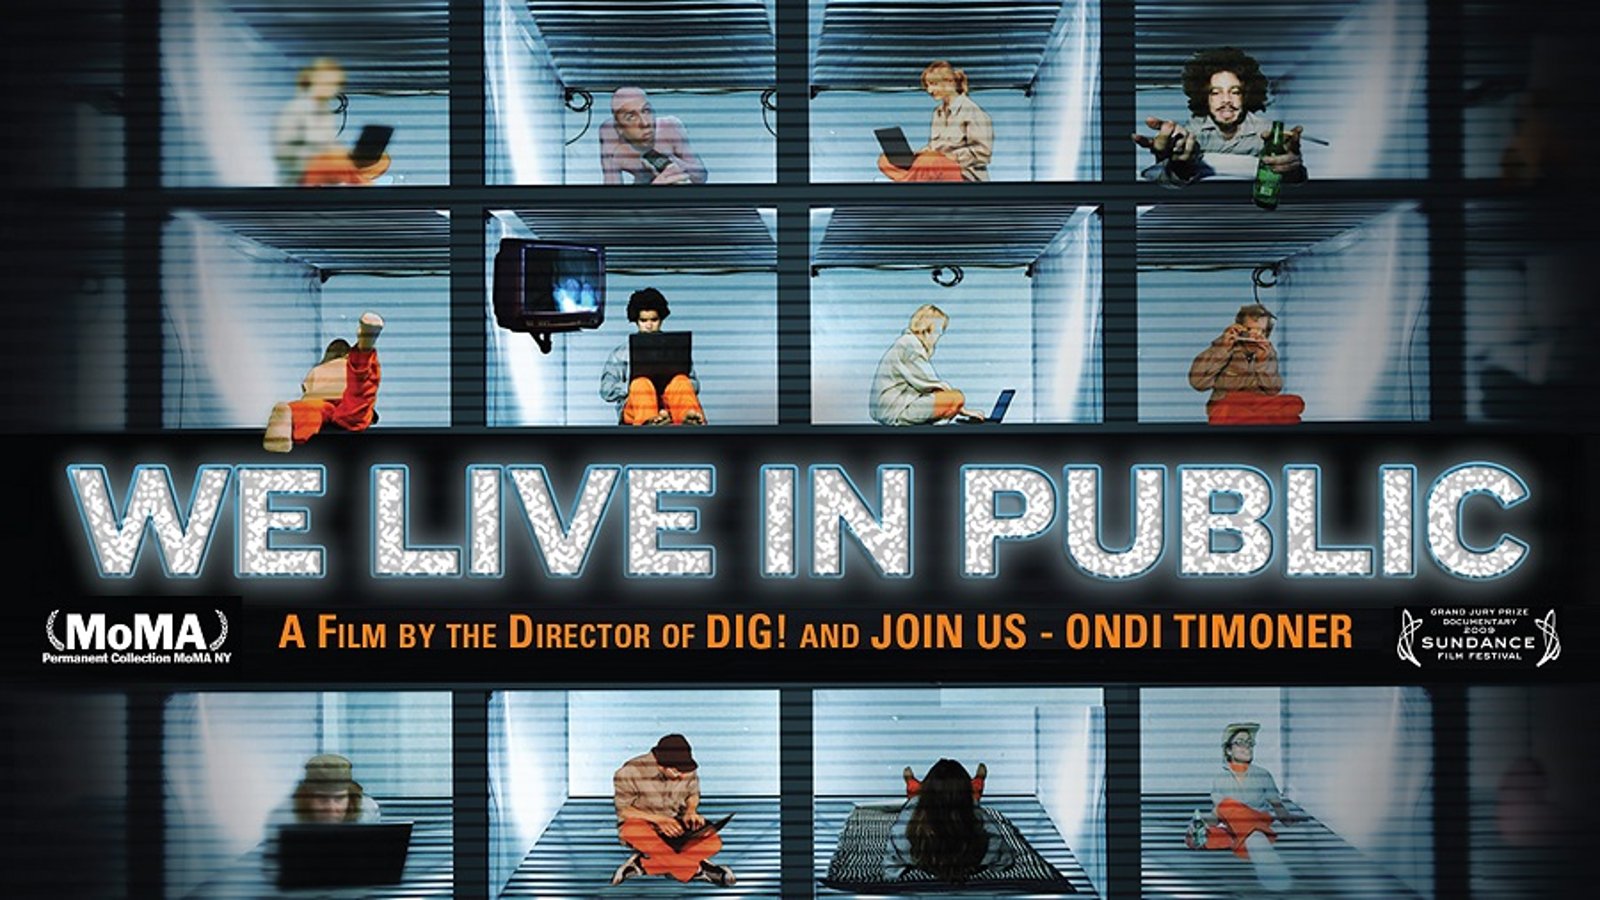 We Live in Public - The Changing Role of Privacy and Technology in Daily Life